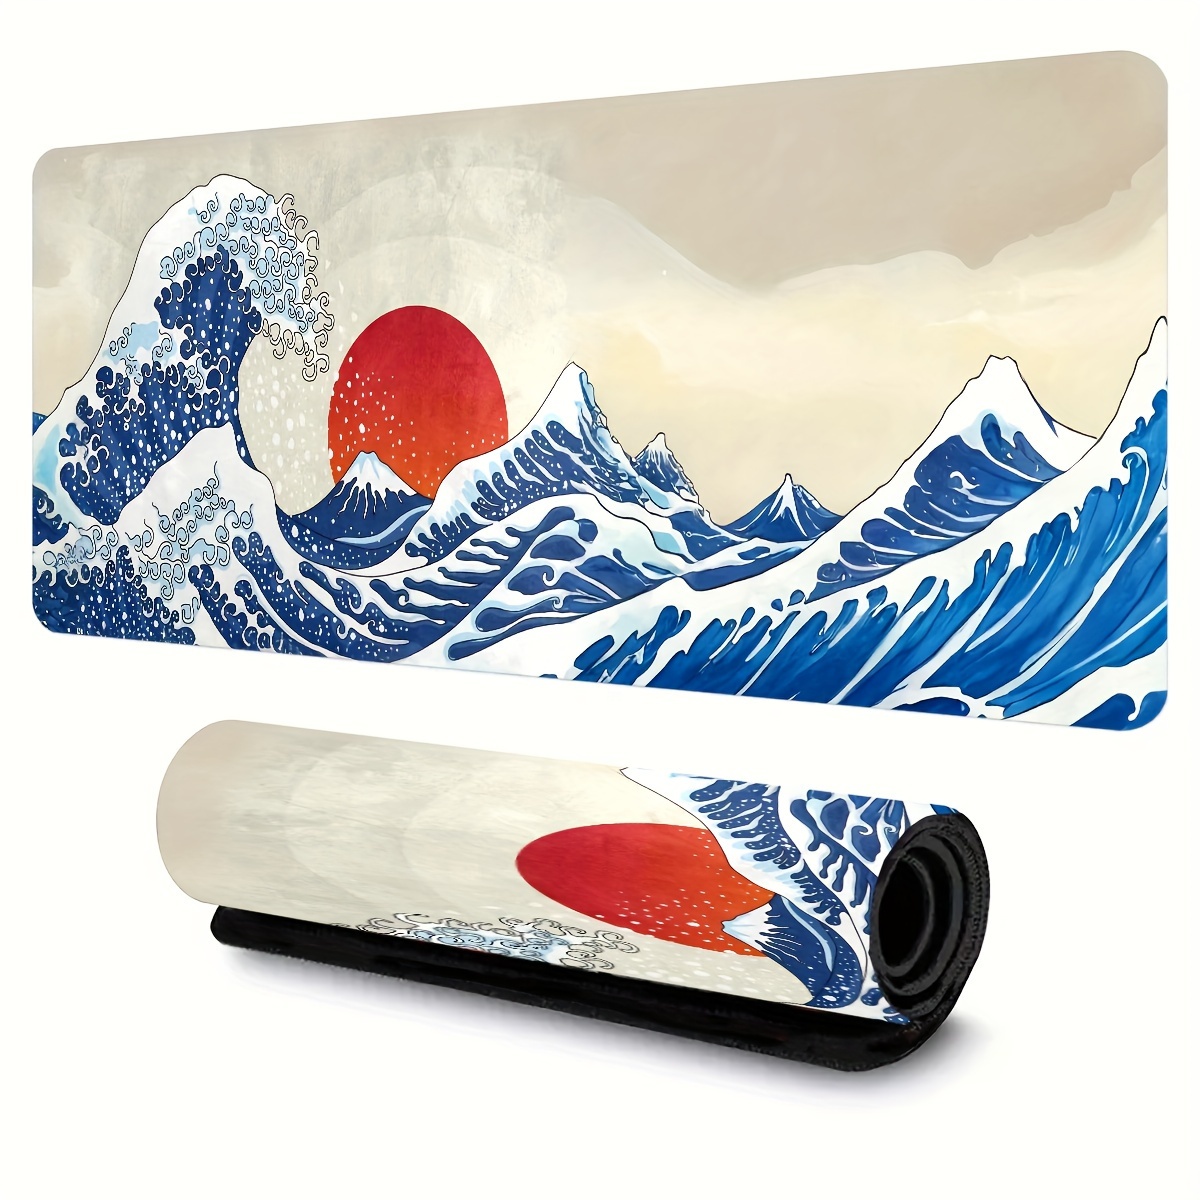 

Kanagawa Wave Large Xl Mouse Pad - Japanese Blue & White Waves Design, 31.5 X 11.8 Inches, Polyester Fiber, Ideal For Office And Gaming